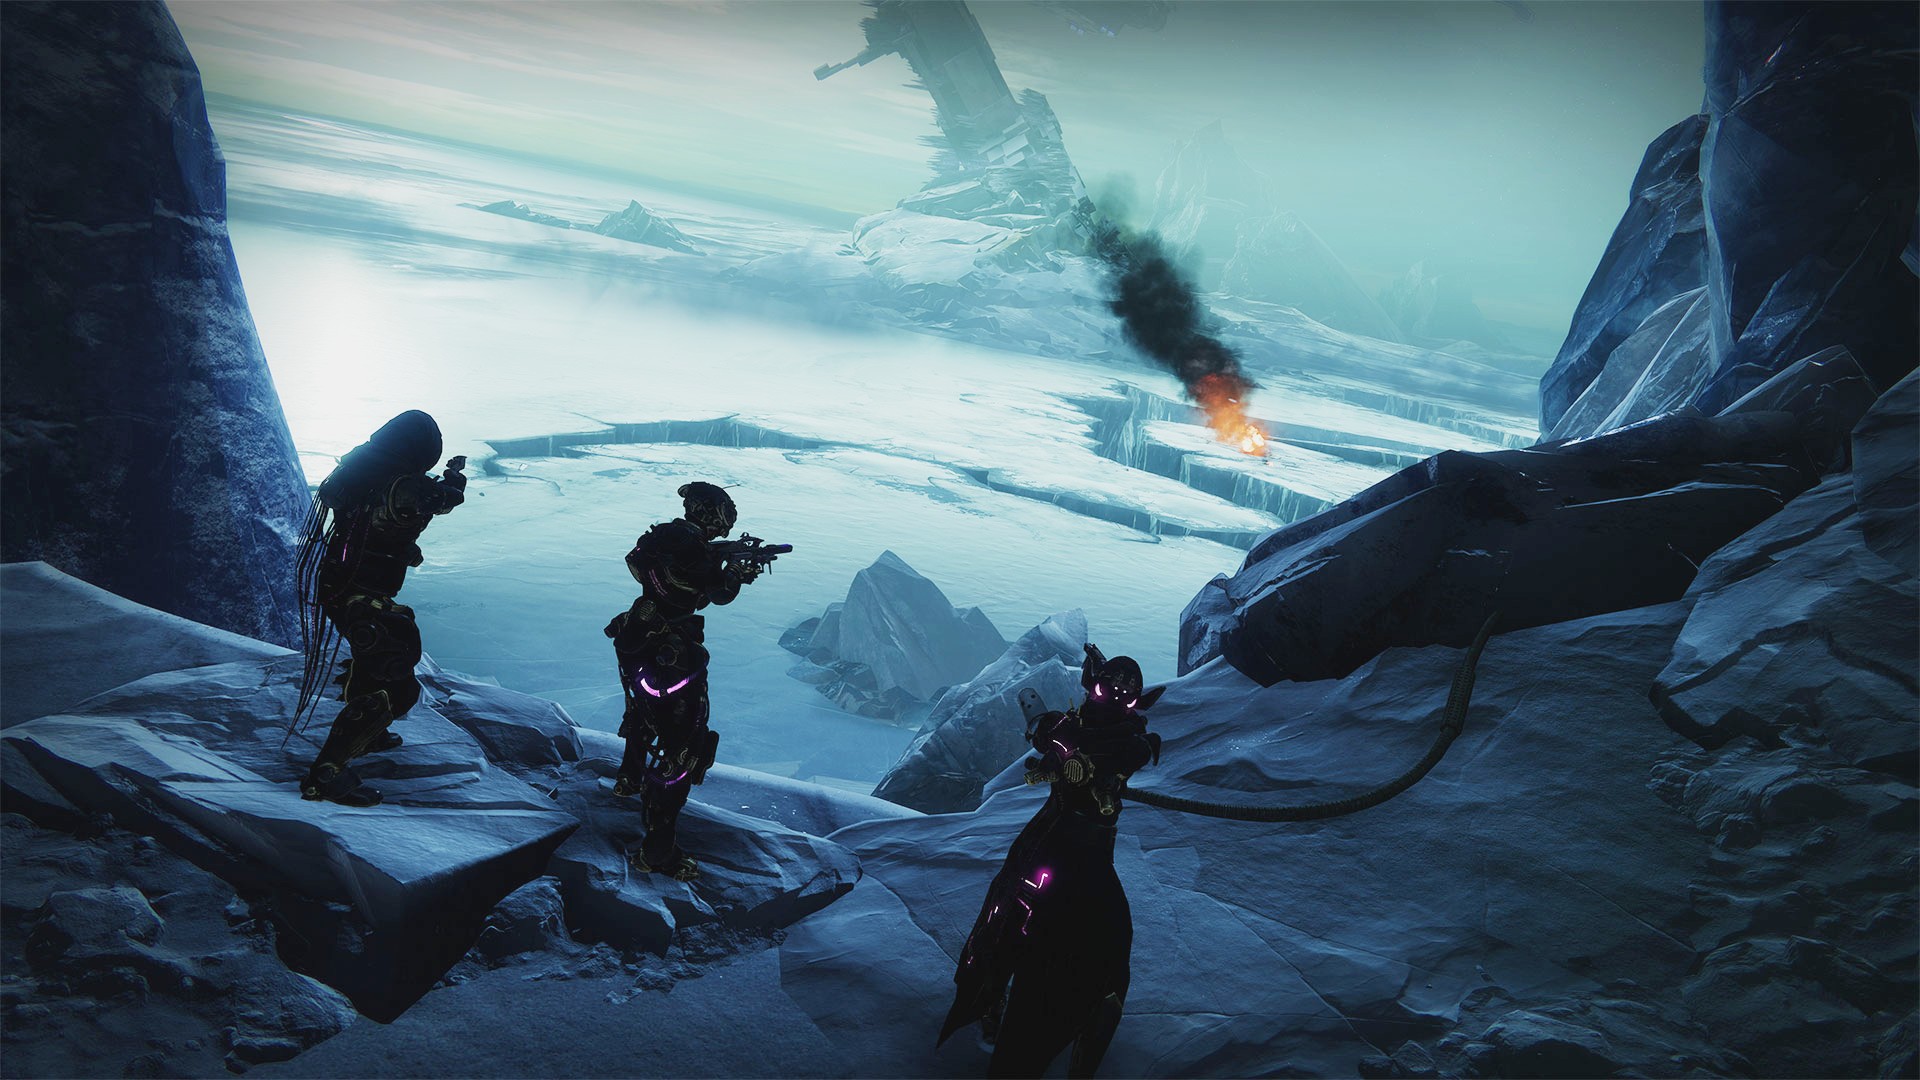 Destiny 2’s Witch Queen expansion will be revealed next month